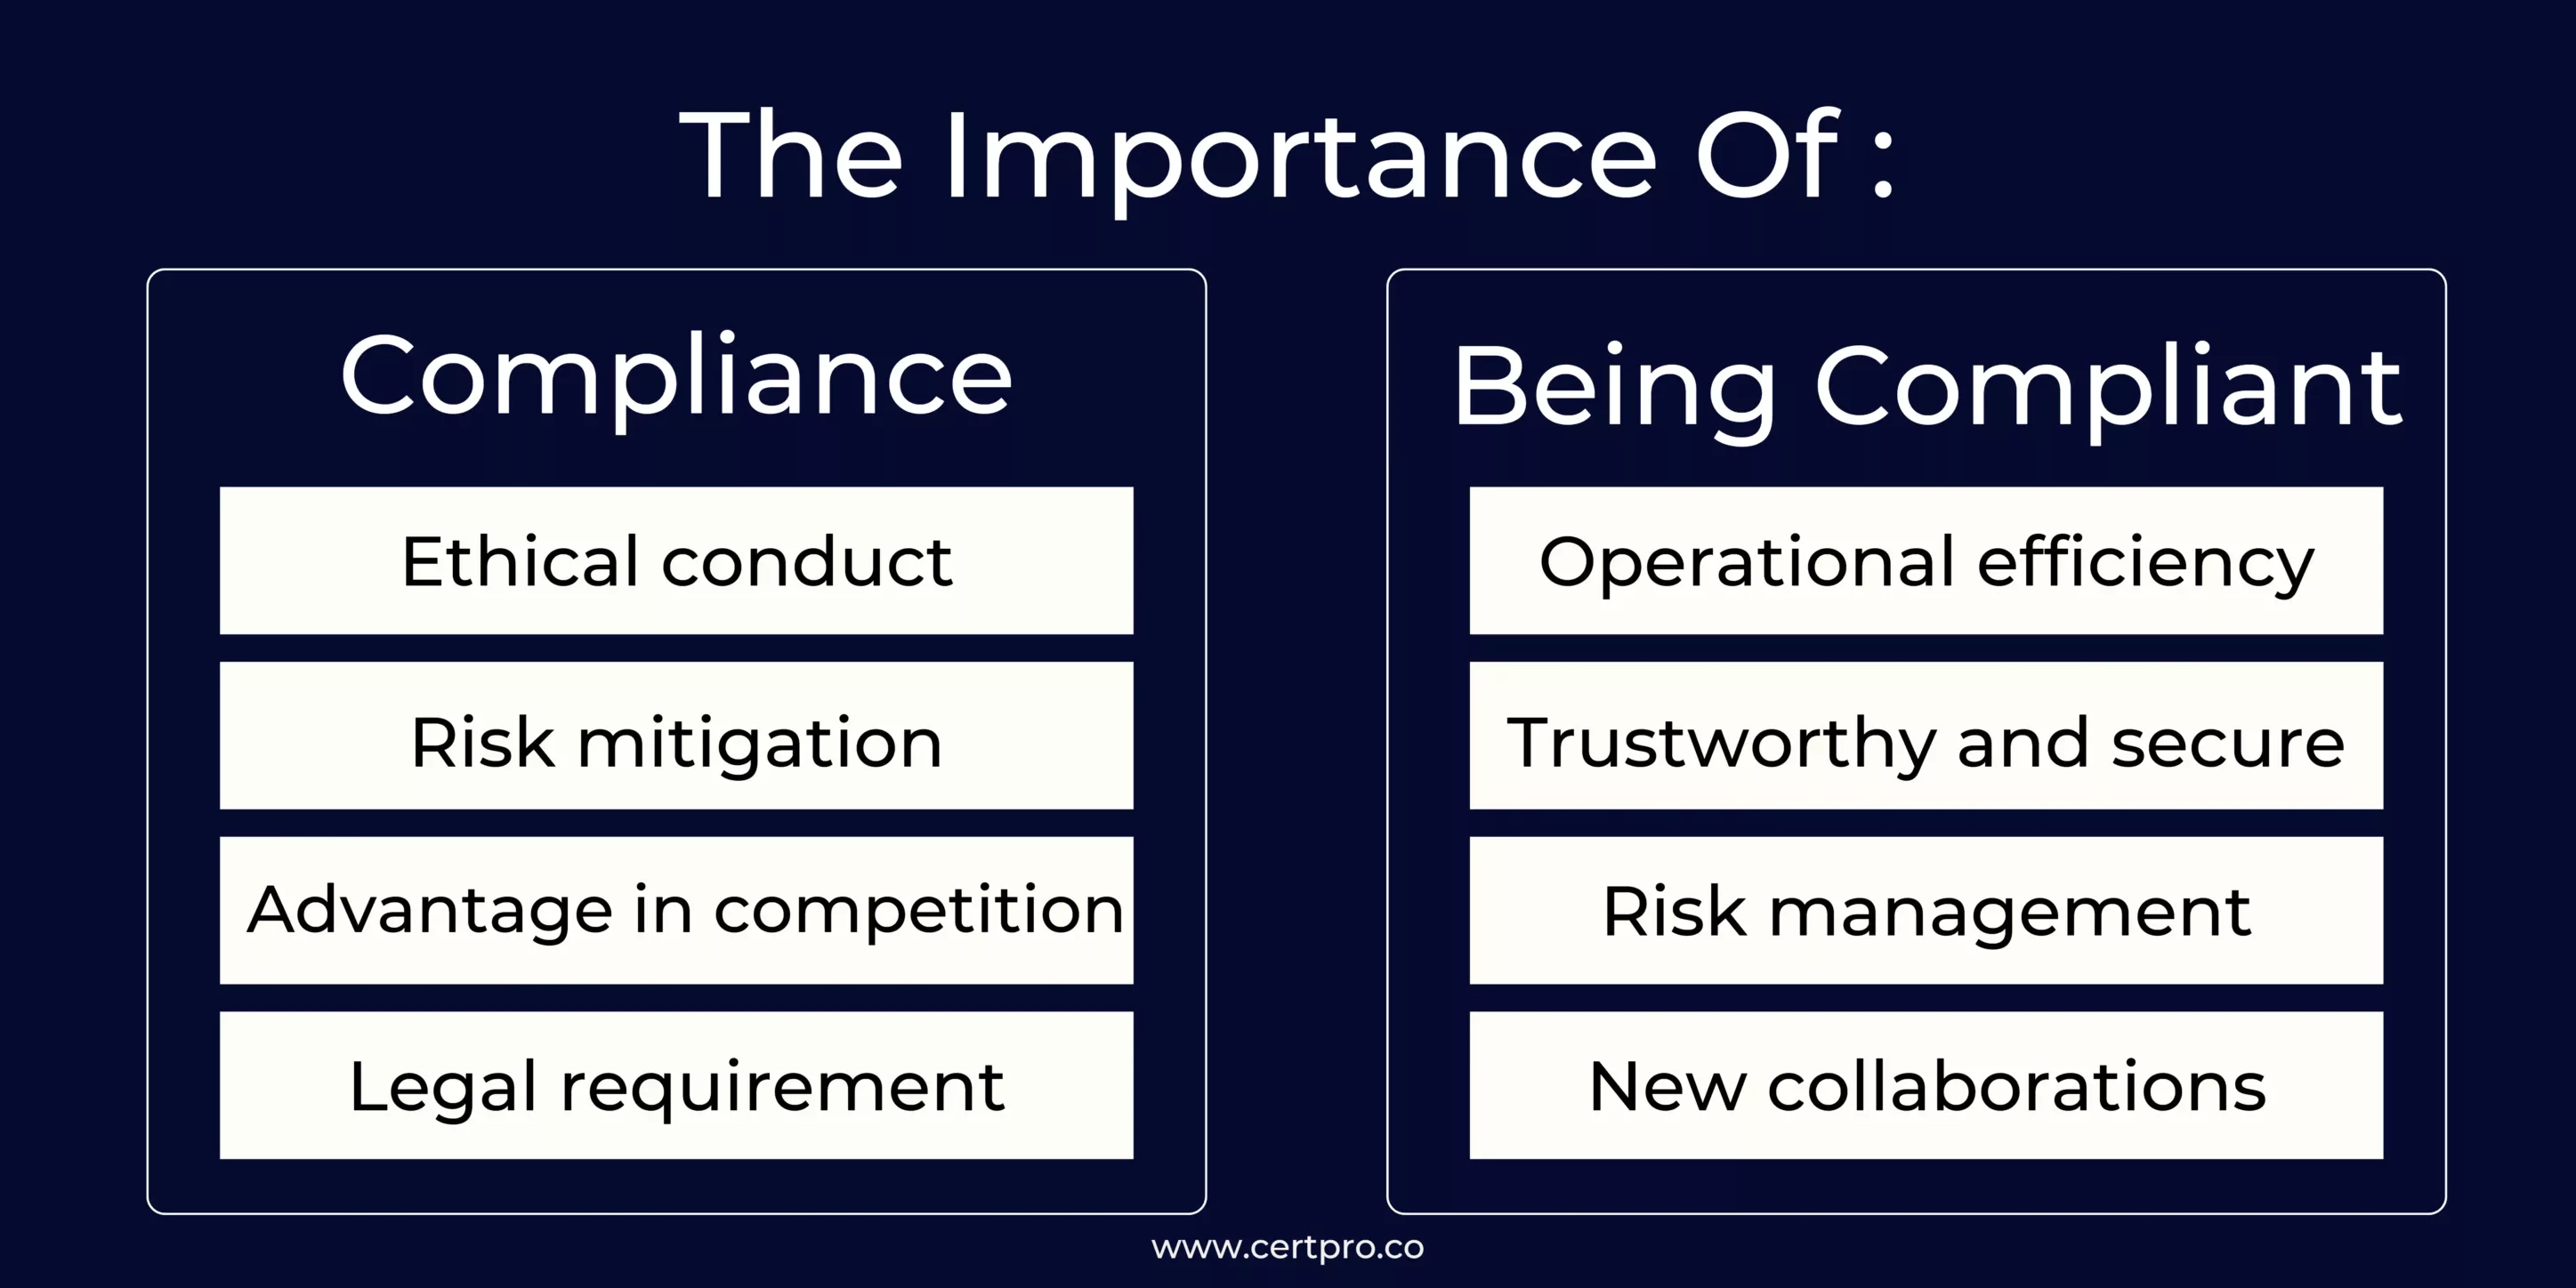 Importance of being compliant